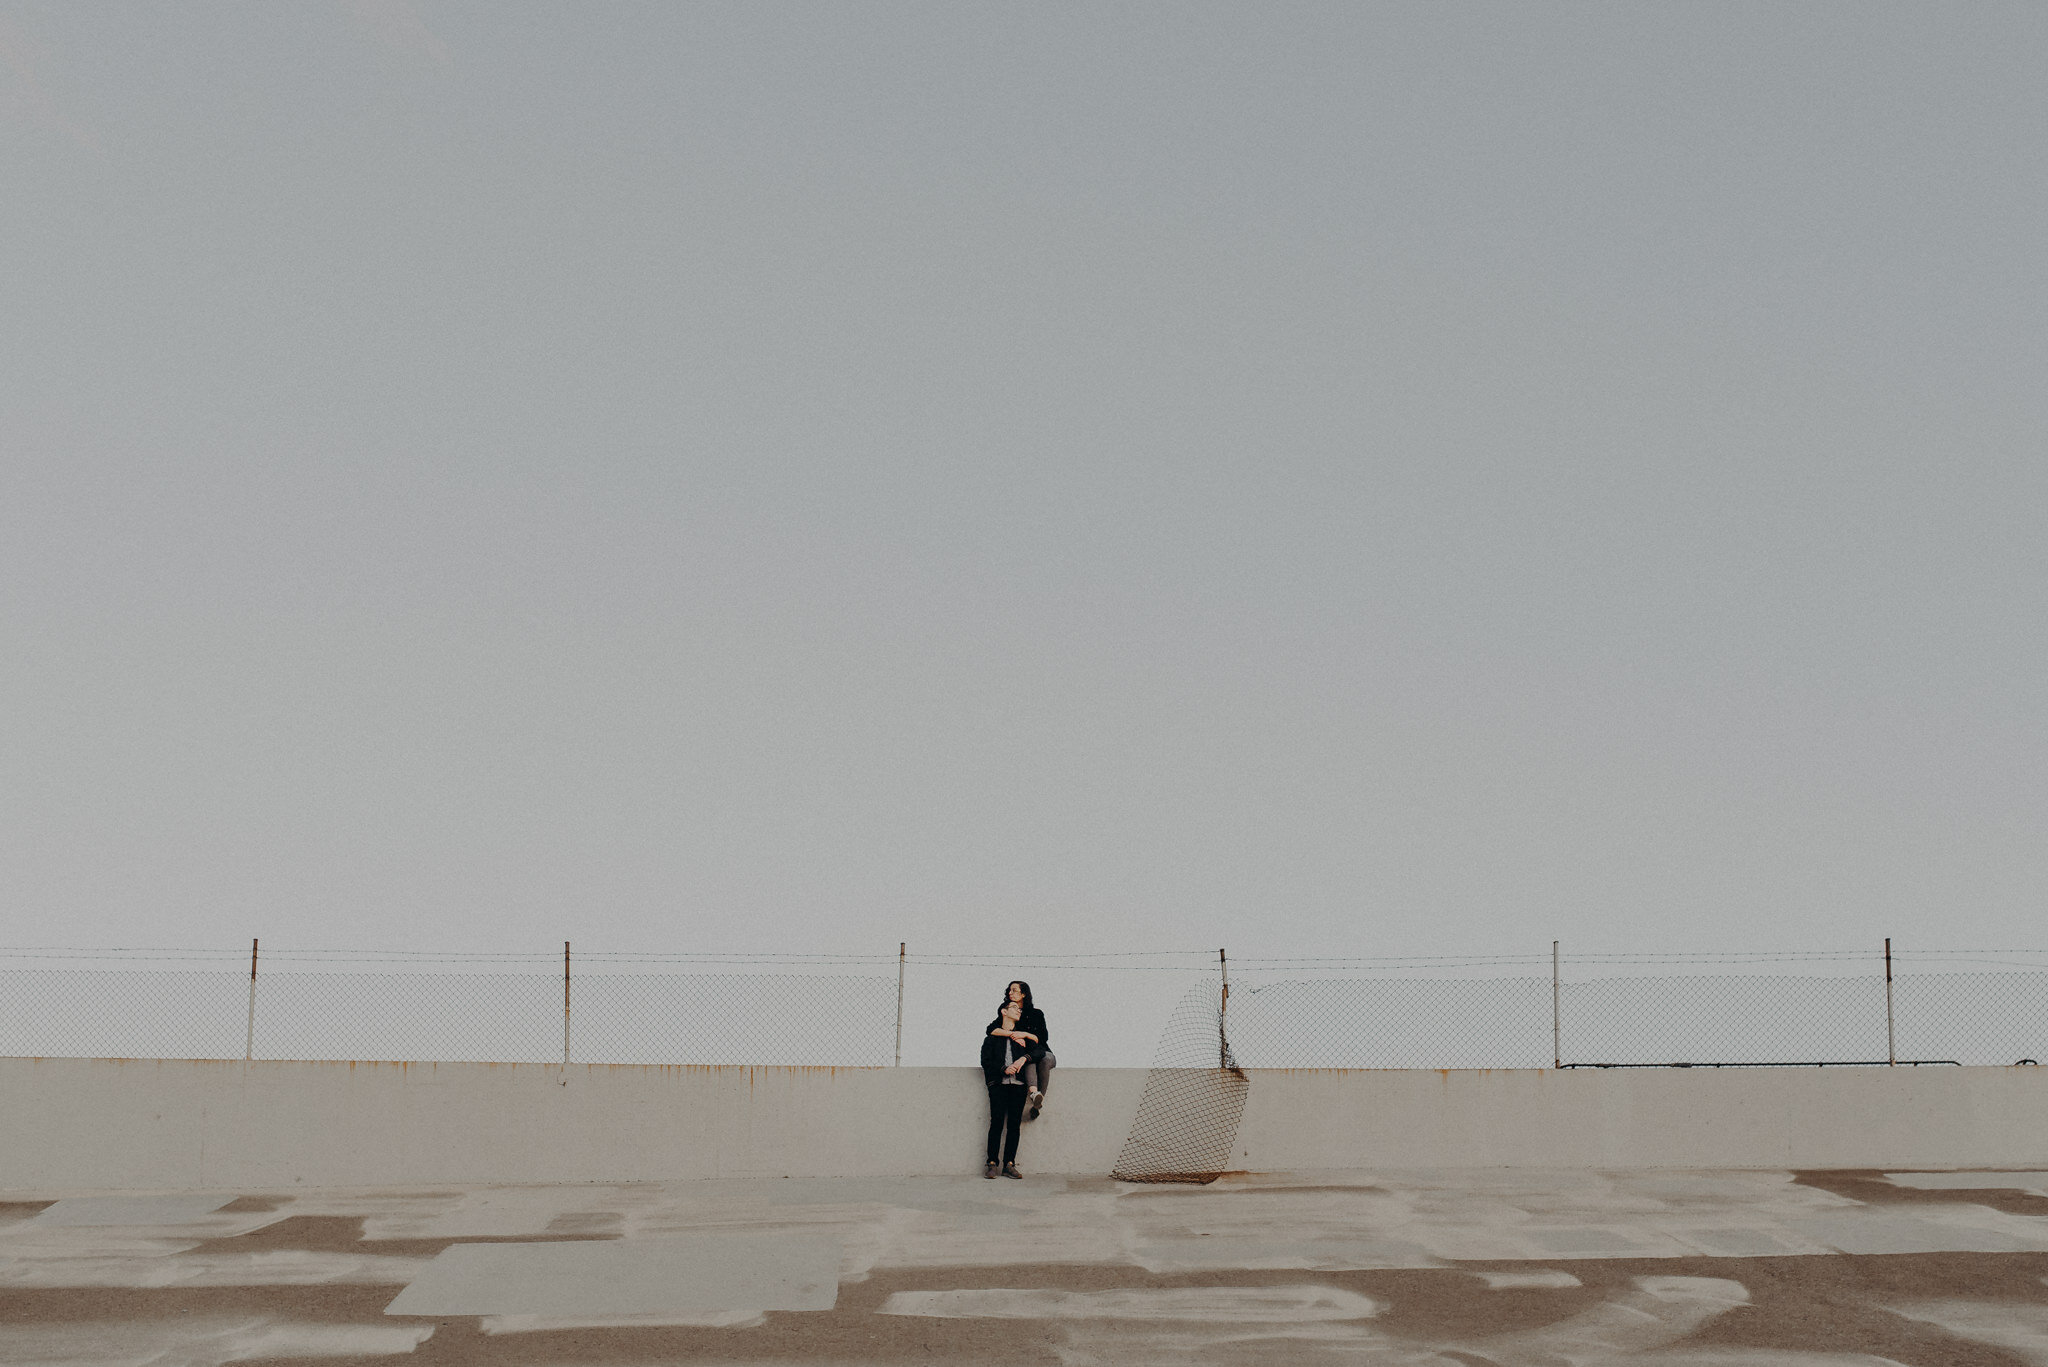 wedding photographer in los angeles - long beach wedding photography - dtla engagement session - isaiahandtaylor.com -076.jpg